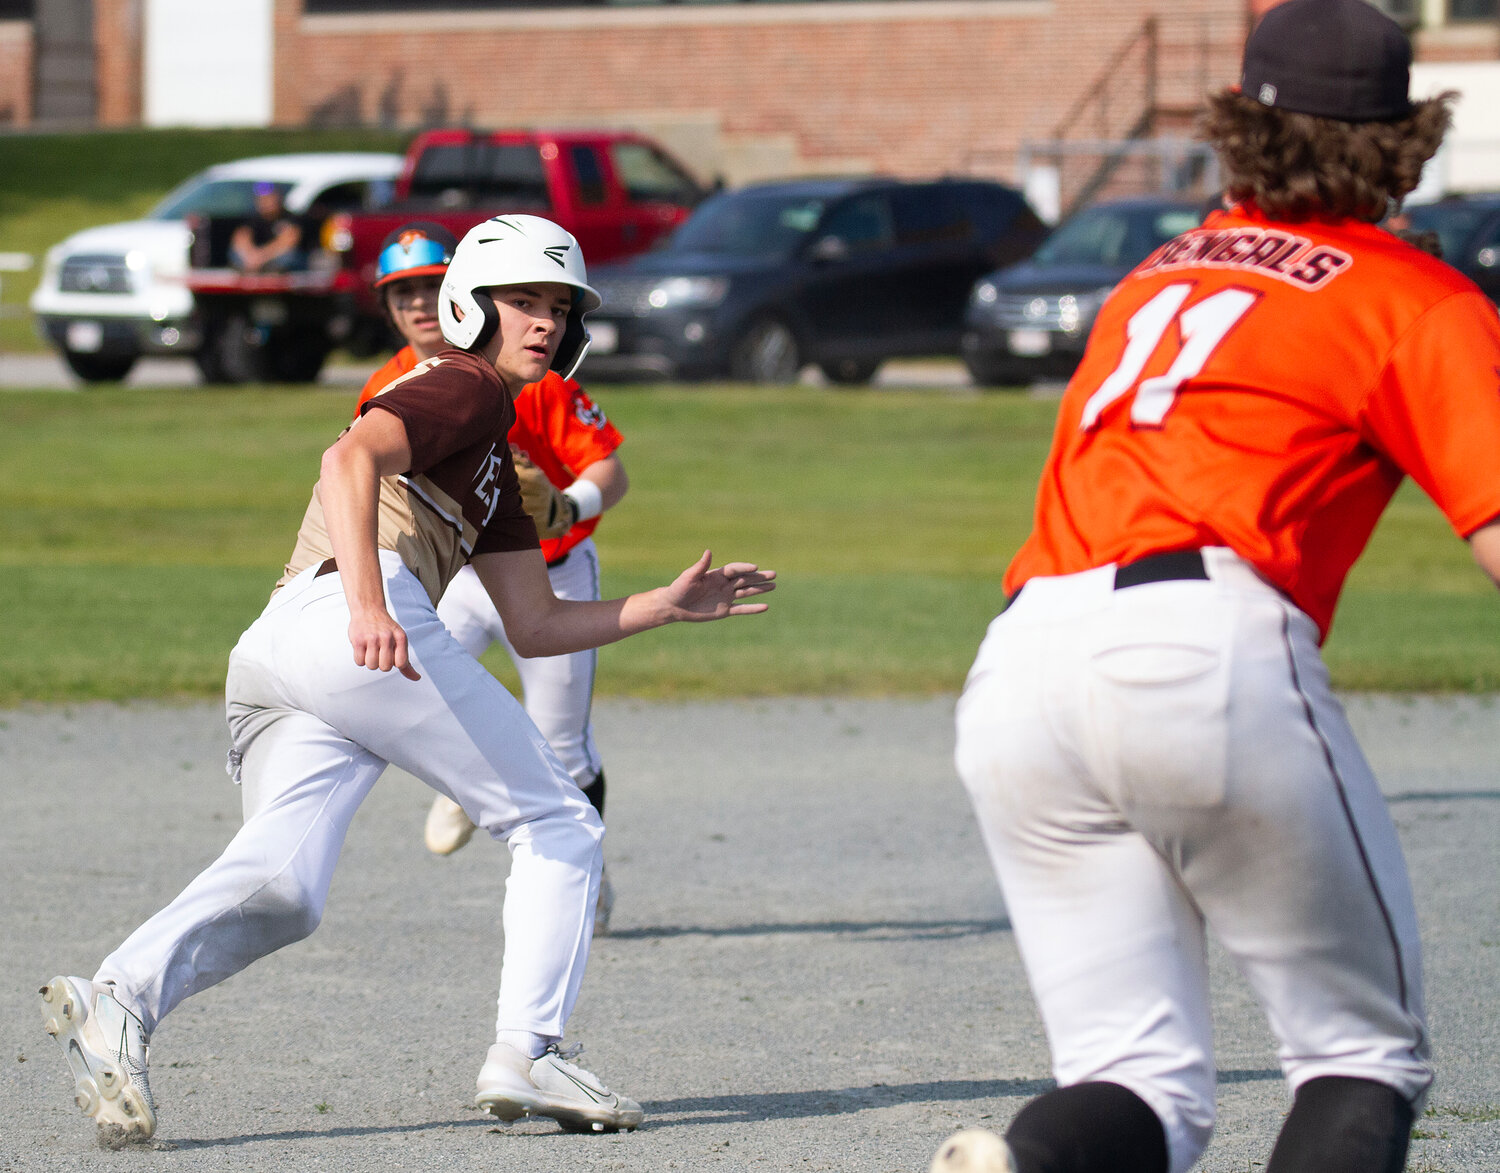 Cam Leary steals second base and gets caught in a rundown during the Wildcats’ 8-0 home win over Diman on Tuesday. Leary the Wildcats’ speedy centerfielder batted .259 also helped out on the mound earning a record of 2-1 with an ERA of 4.08.